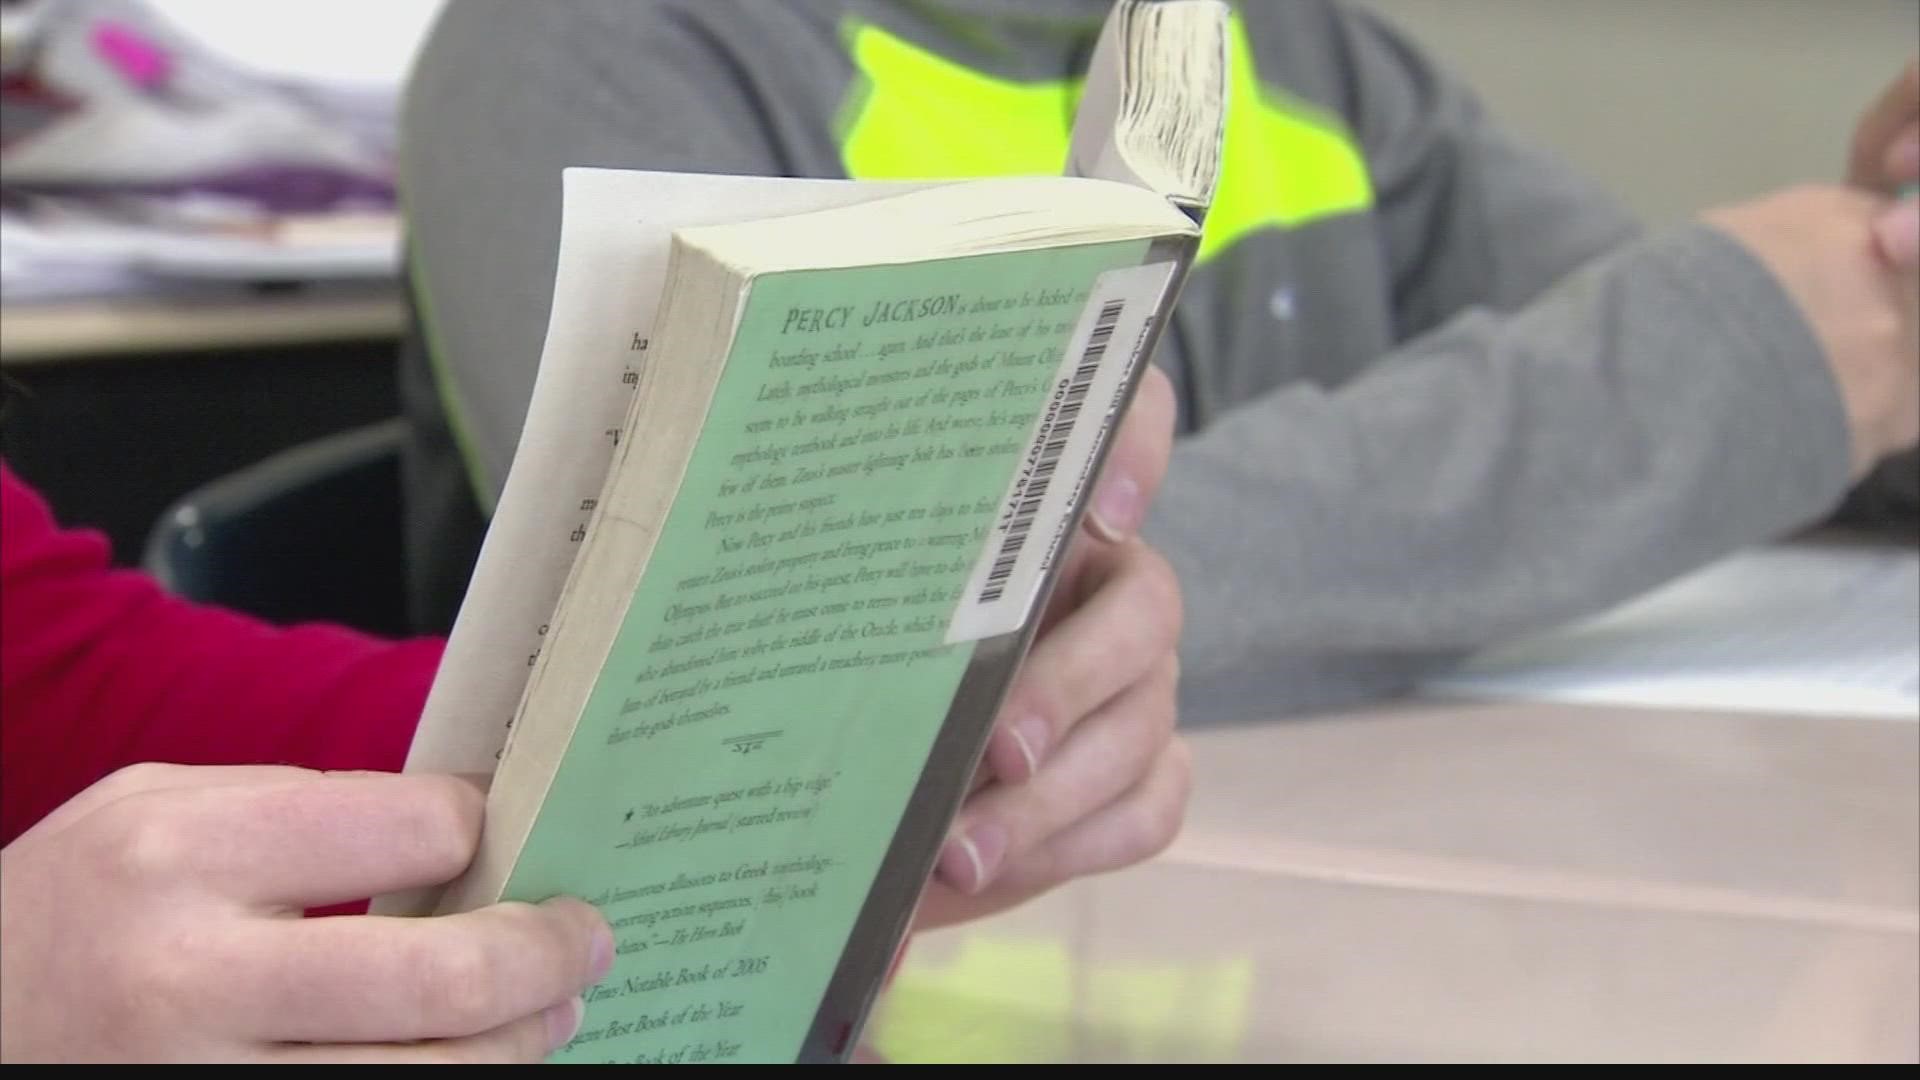 The state of Indiana is making a huge investment in reading after disappointing test scores were released earlier this month.